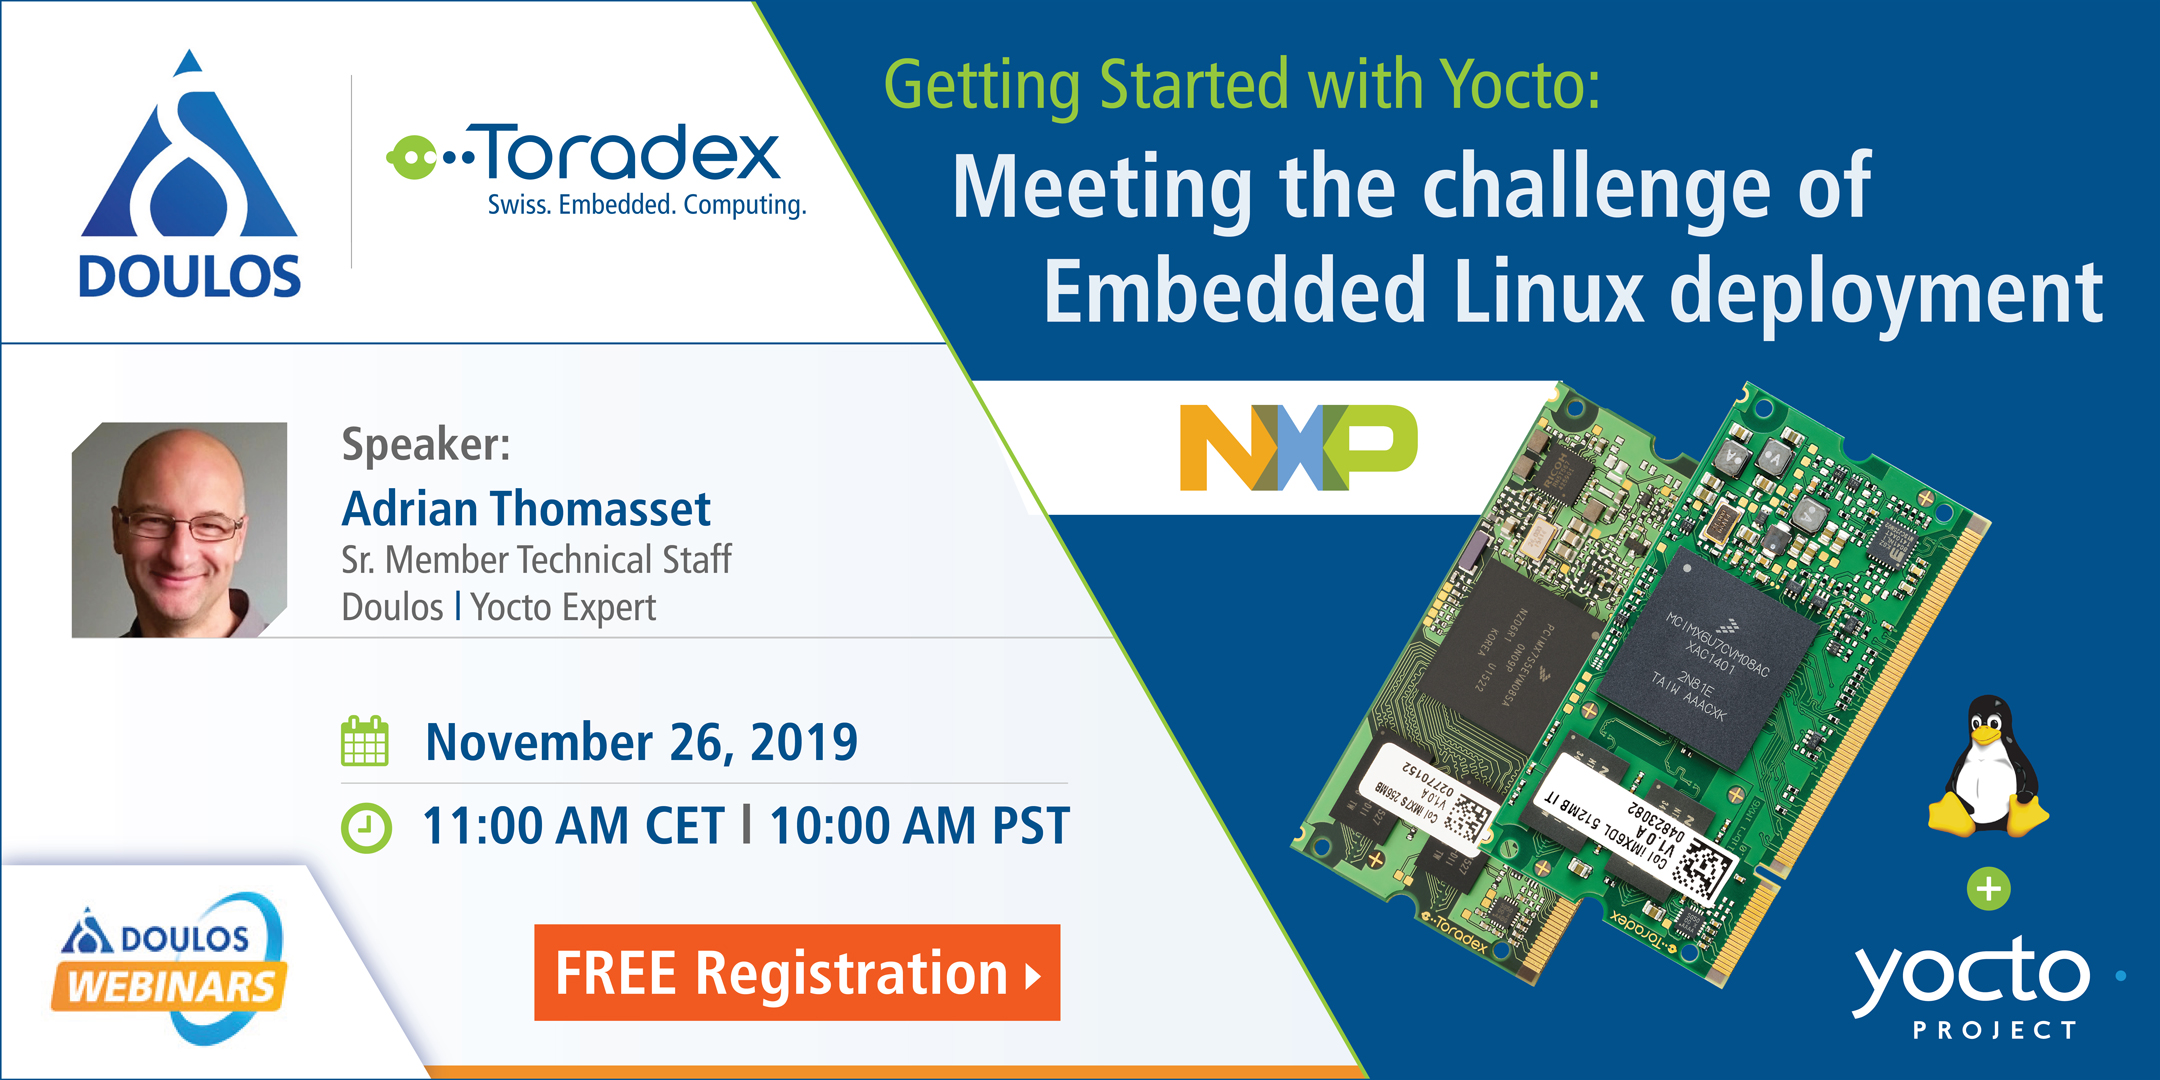 Getting Started with Yocto - Meeting the challenge of Embedded Linux deployment